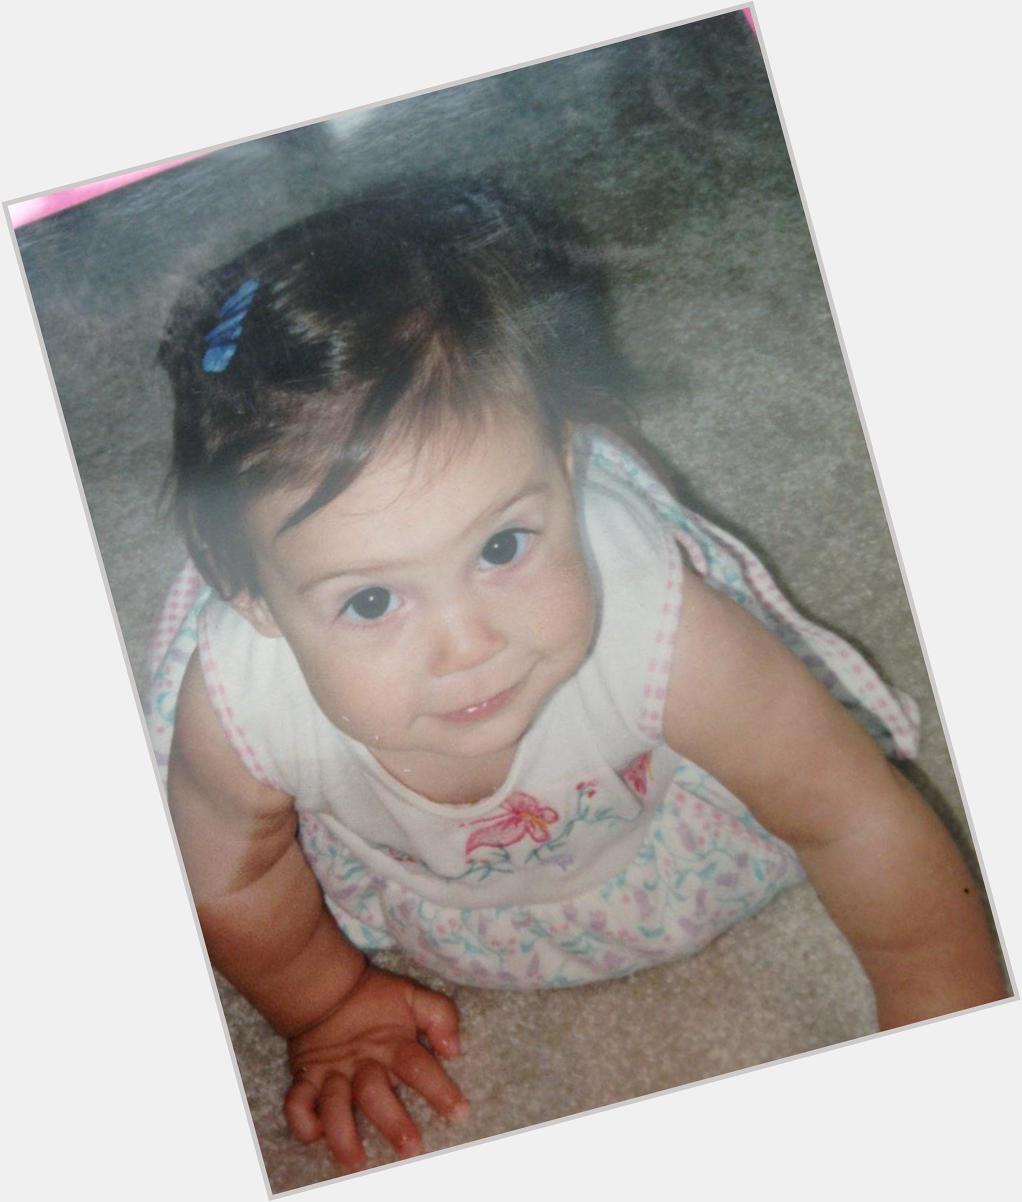 How have 20 years gone by?! I miss this baby girl but I treasure the memories Happy Birthday Nicole Lyn 2/27/1995 